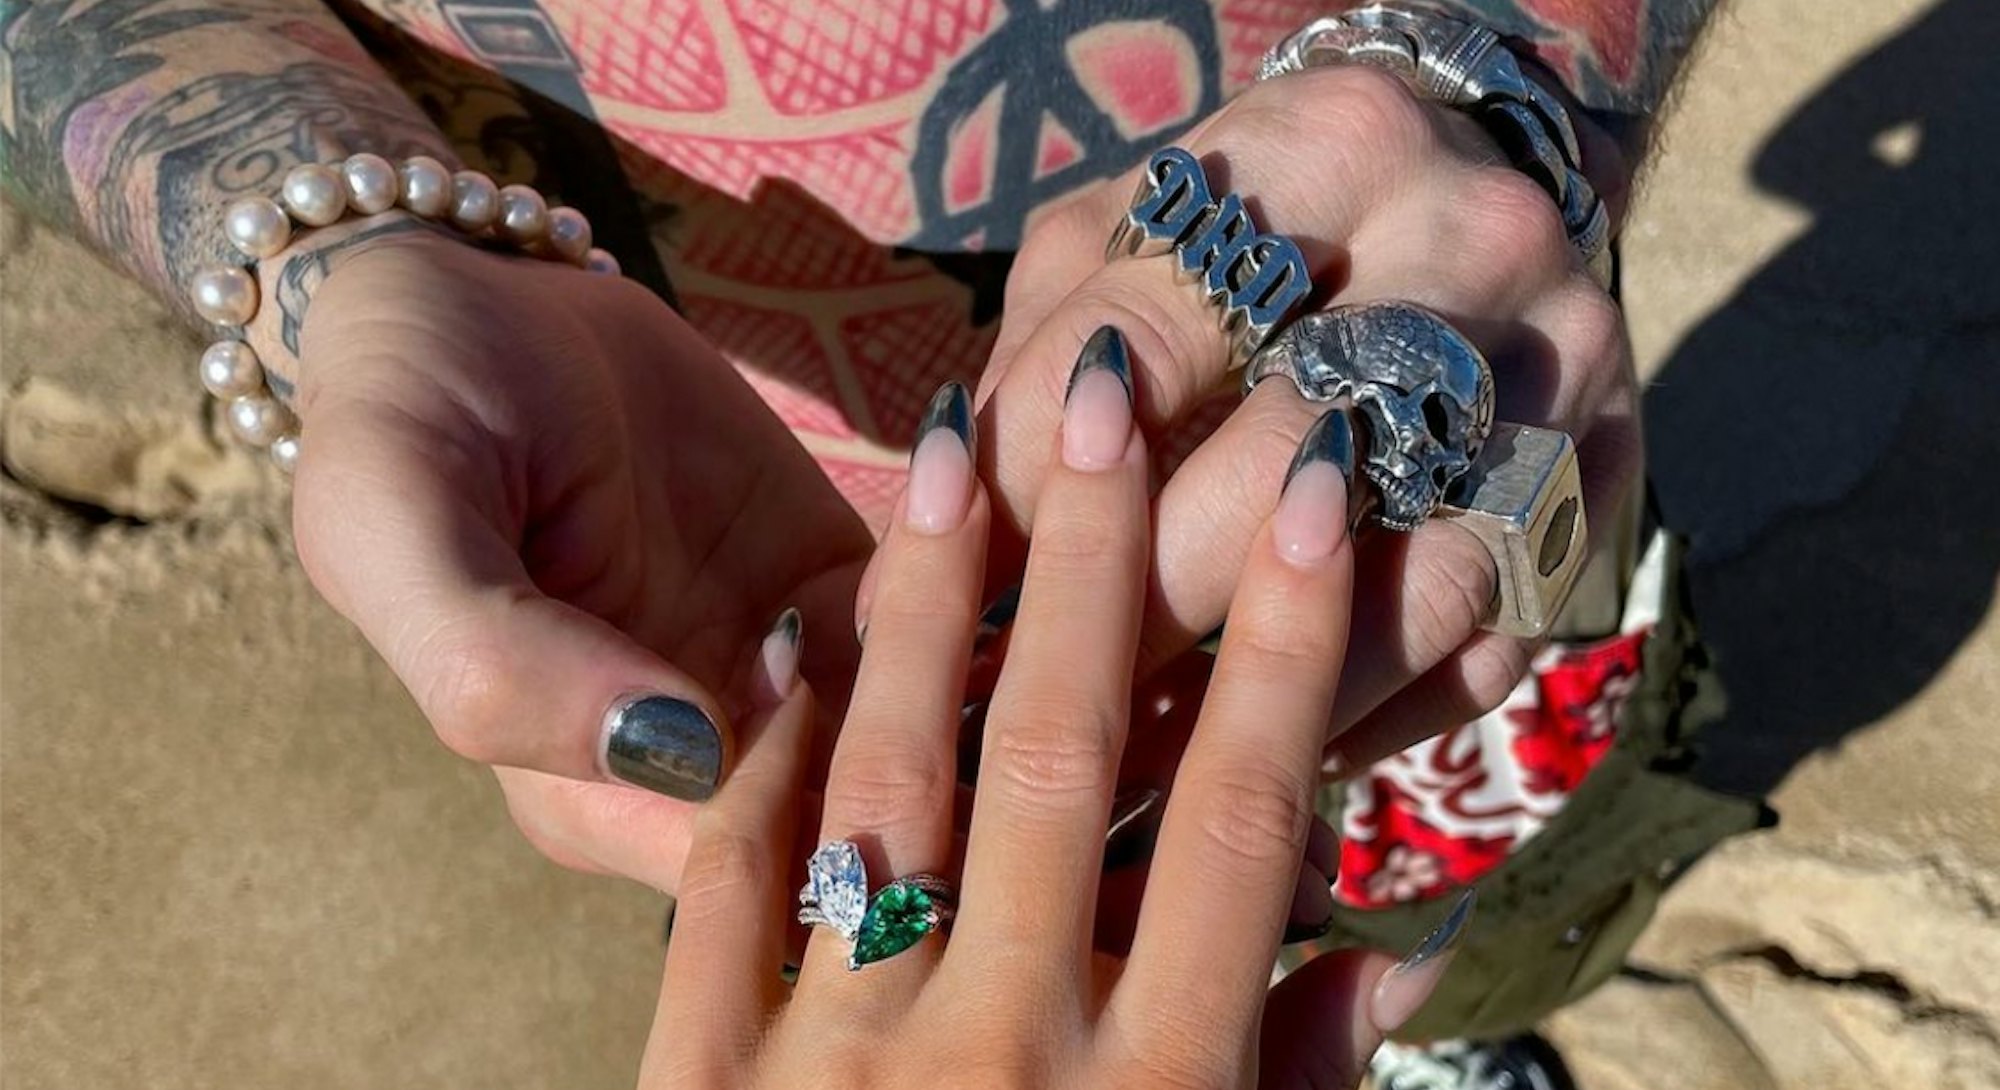 The couples' nail art trend